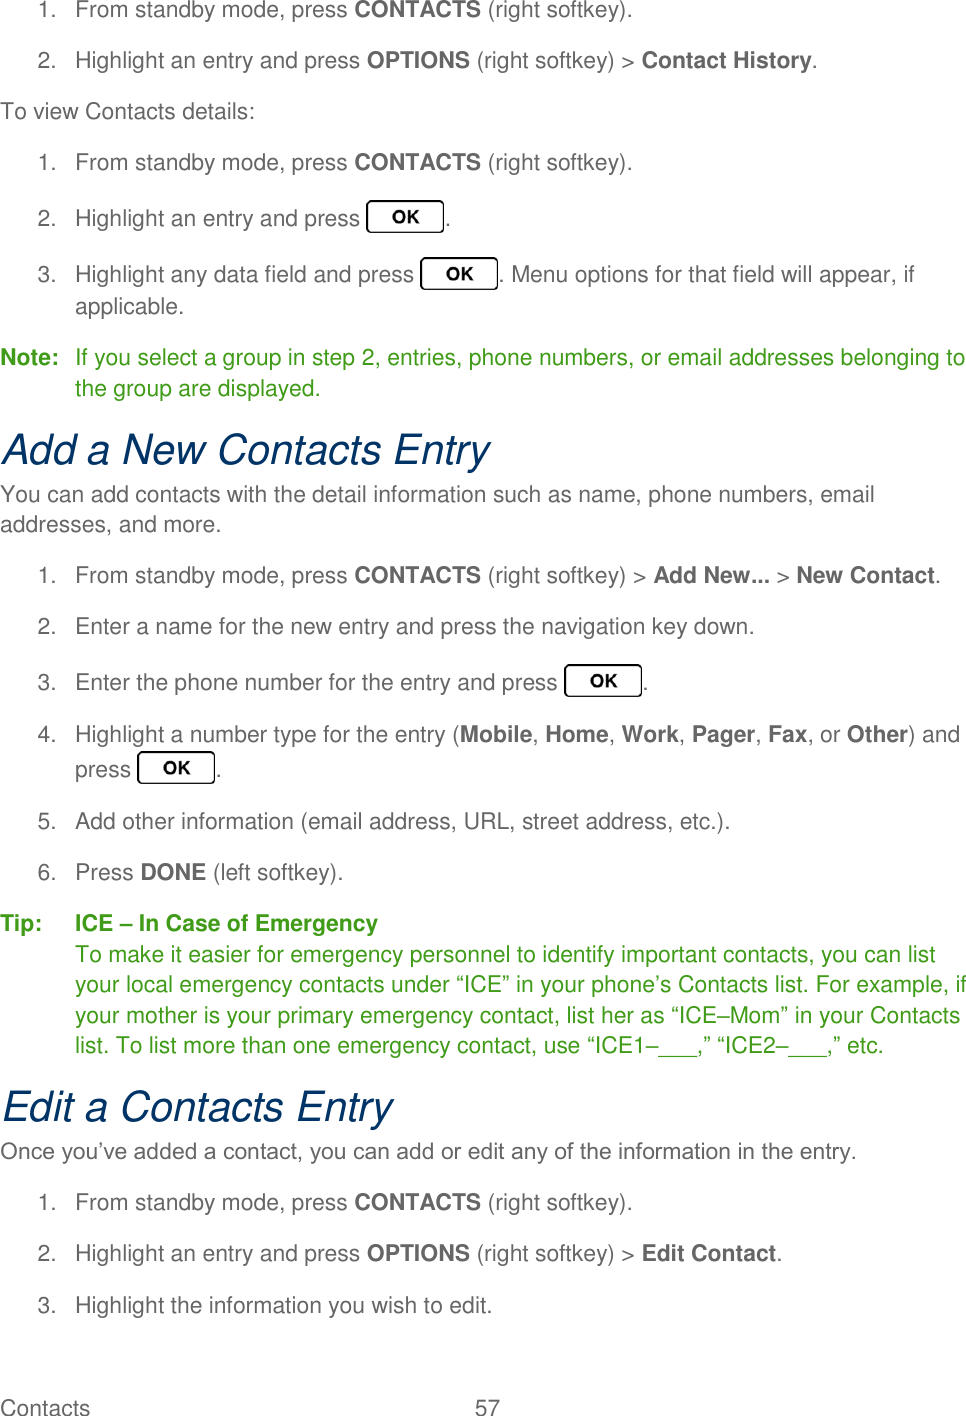 Contacts  57   1.  From standby mode, press CONTACTS (right softkey). 2.  Highlight an entry and press OPTIONS (right softkey) &gt; Contact History. To view Contacts details: 1.  From standby mode, press CONTACTS (right softkey). 2.  Highlight an entry and press  . 3.  Highlight any data field and press  . Menu options for that field will appear, if applicable. Note:  If you select a group in step 2, entries, phone numbers, or email addresses belonging to the group are displayed. Add a New Contacts Entry You can add contacts with the detail information such as name, phone numbers, email addresses, and more. 1.  From standby mode, press CONTACTS (right softkey) &gt; Add New... &gt; New Contact. 2.  Enter a name for the new entry and press the navigation key down. 3.  Enter the phone number for the entry and press  . 4.  Highlight a number type for the entry (Mobile, Home, Work, Pager, Fax, or Other) and press  . 5.  Add other information (email address, URL, street address, etc.). 6.  Press DONE (left softkey). Tip:  ICE – In Case of Emergency To make it easier for emergency personnel to identify important contacts, you can list your local emergency contacts under “ICE” in your phone’s Contacts list. For example, if your mother is your primary emergency contact, list her as “ICE–Mom” in your Contacts list. To list more than one emergency contact, use “ICE1–___,” “ICE2–___,” etc. Edit a Contacts Entry Once you’ve added a contact, you can add or edit any of the information in the entry. 1.  From standby mode, press CONTACTS (right softkey). 2.  Highlight an entry and press OPTIONS (right softkey) &gt; Edit Contact. 3.  Highlight the information you wish to edit. 